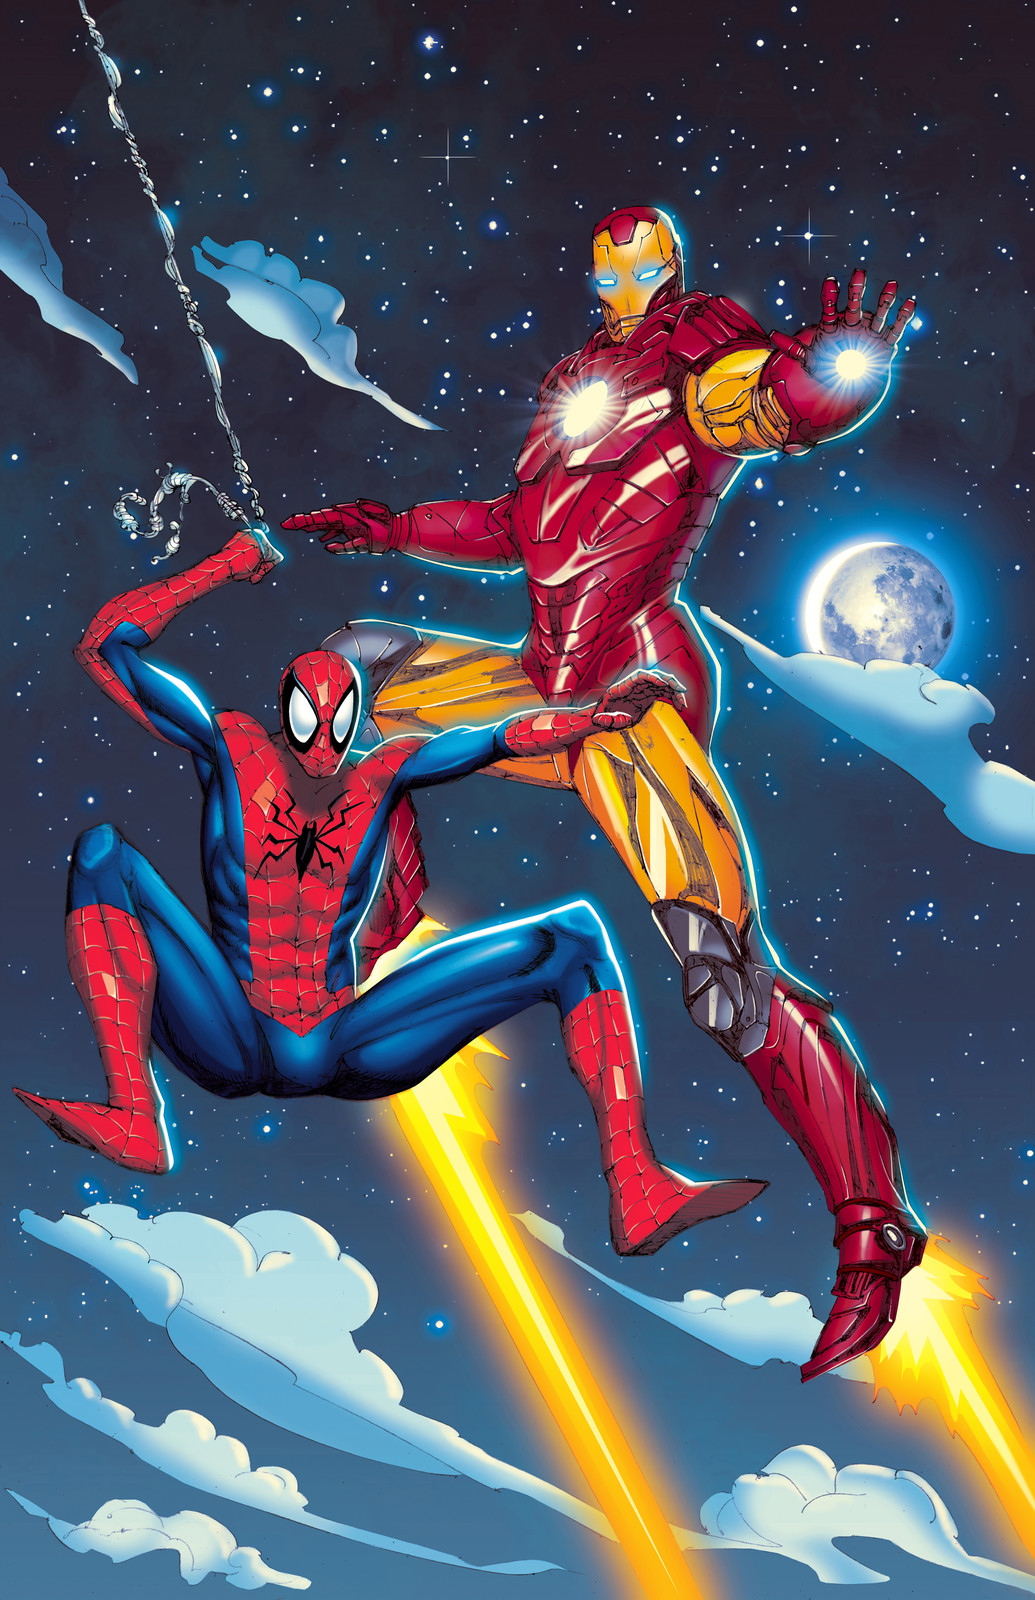 Spider Man and Iron Man. The Avengers